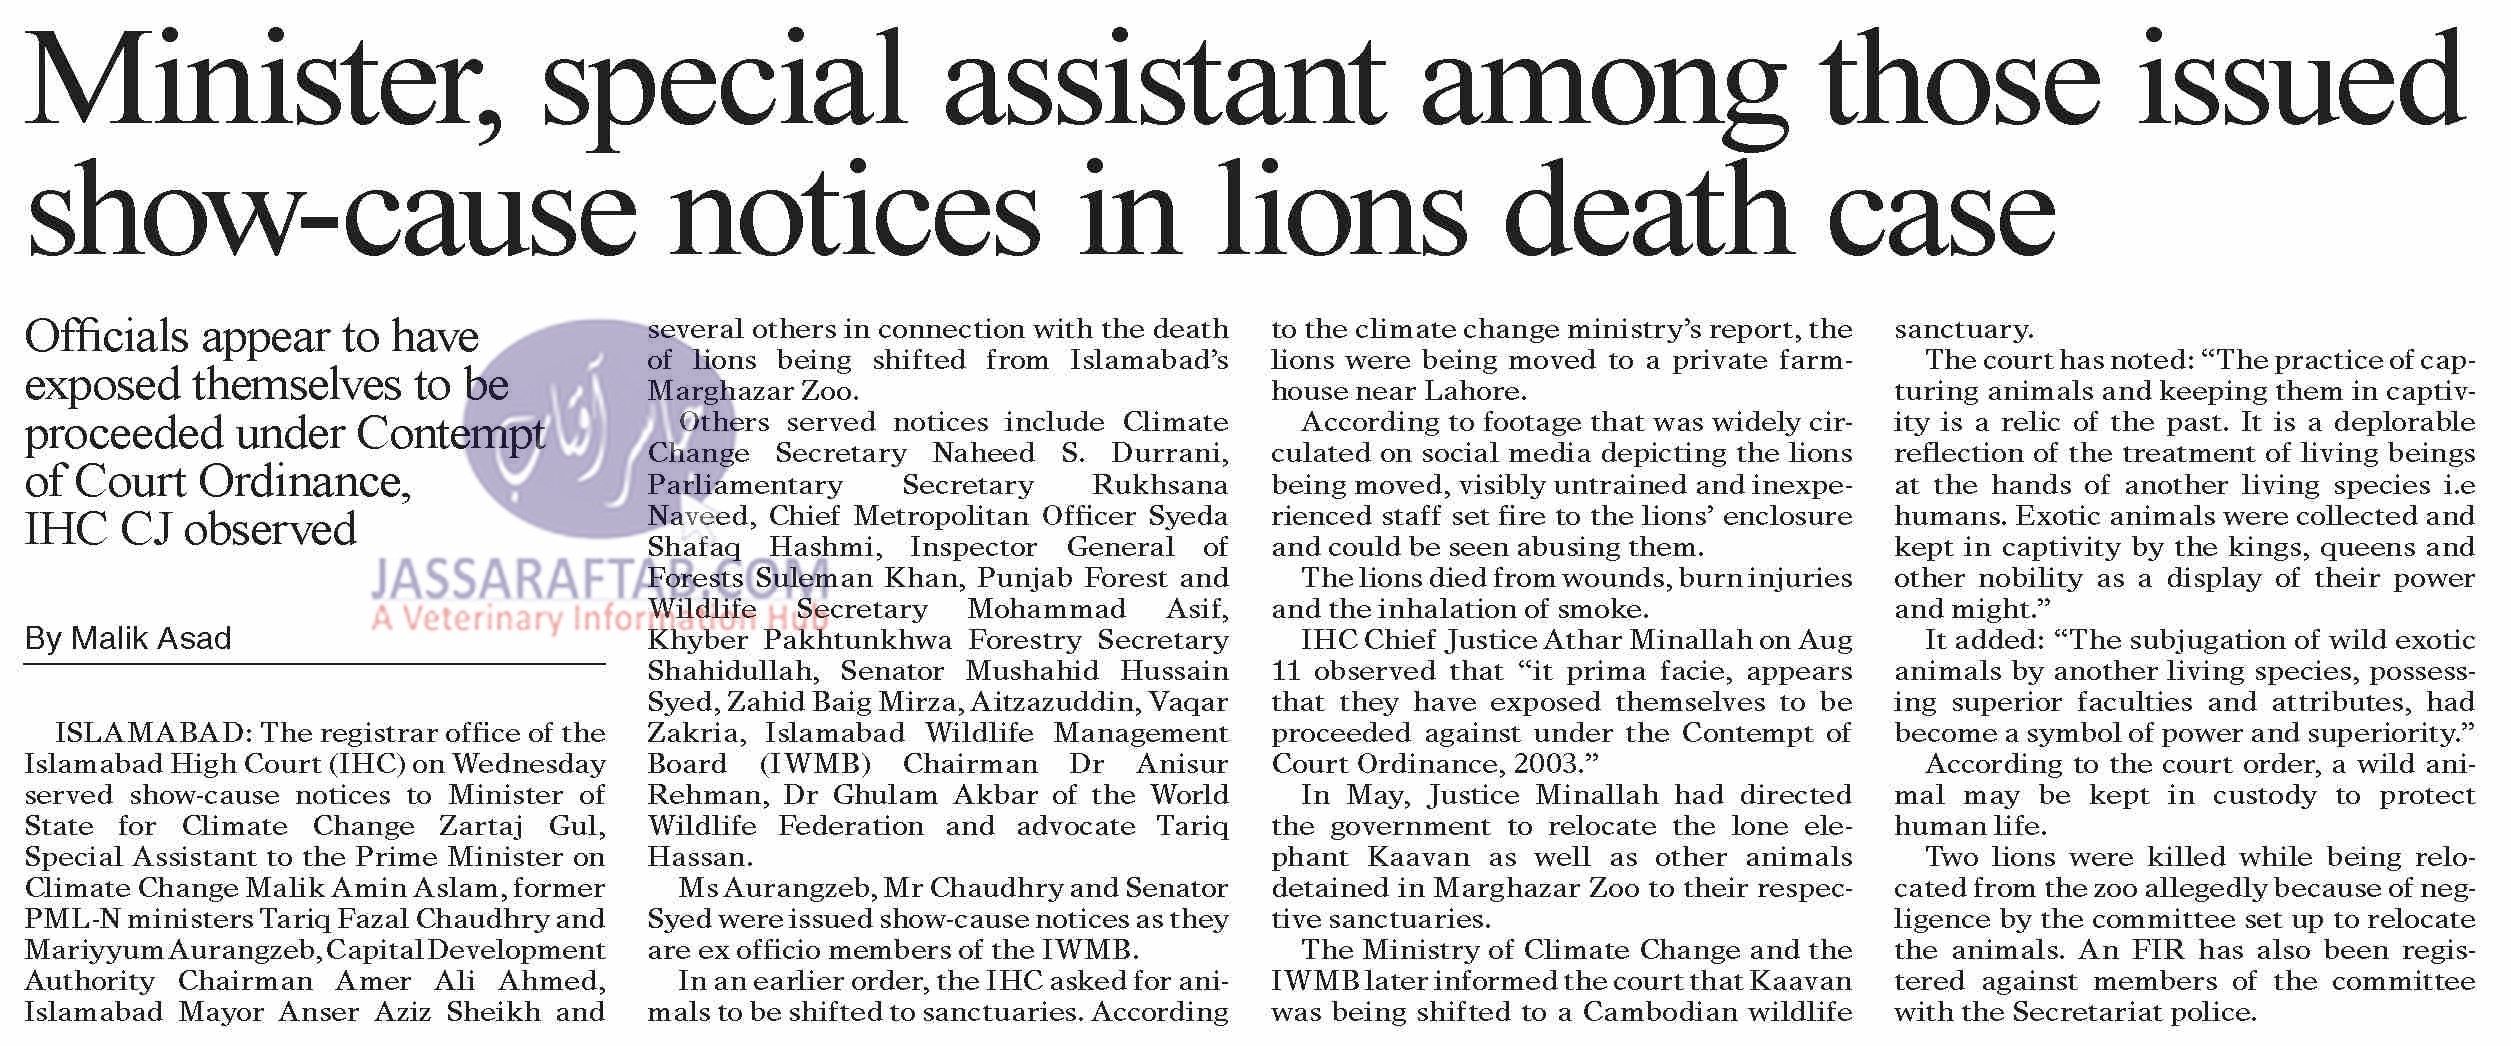 IHC issued show-cause notices in lions death case